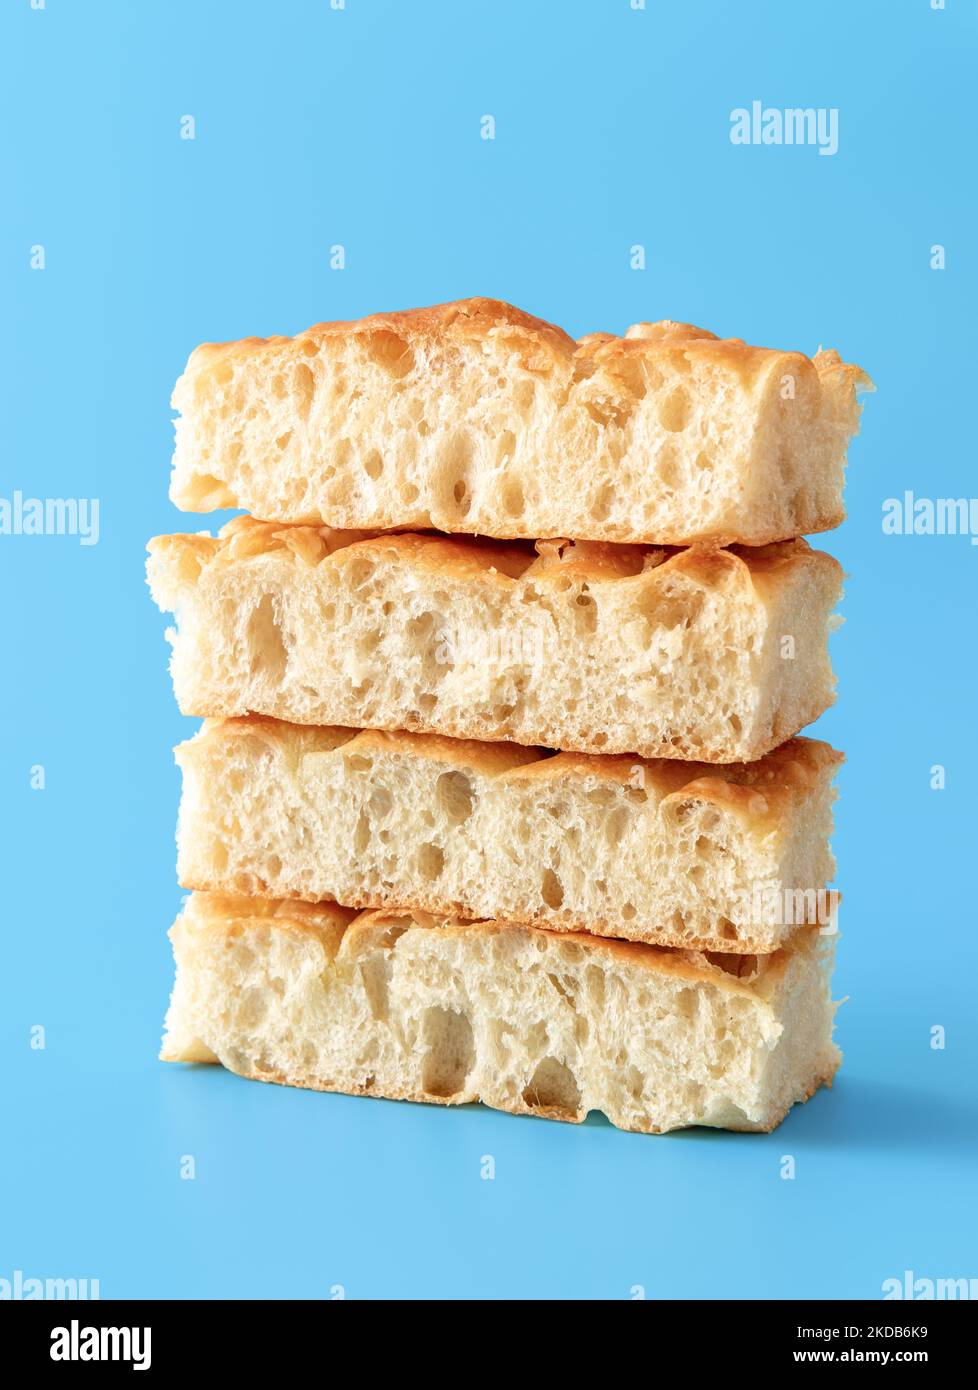 Stack of focaccia bread slices on a blue table. Pieces of homemade focaccia minimalist on a blue background. Stock Photo